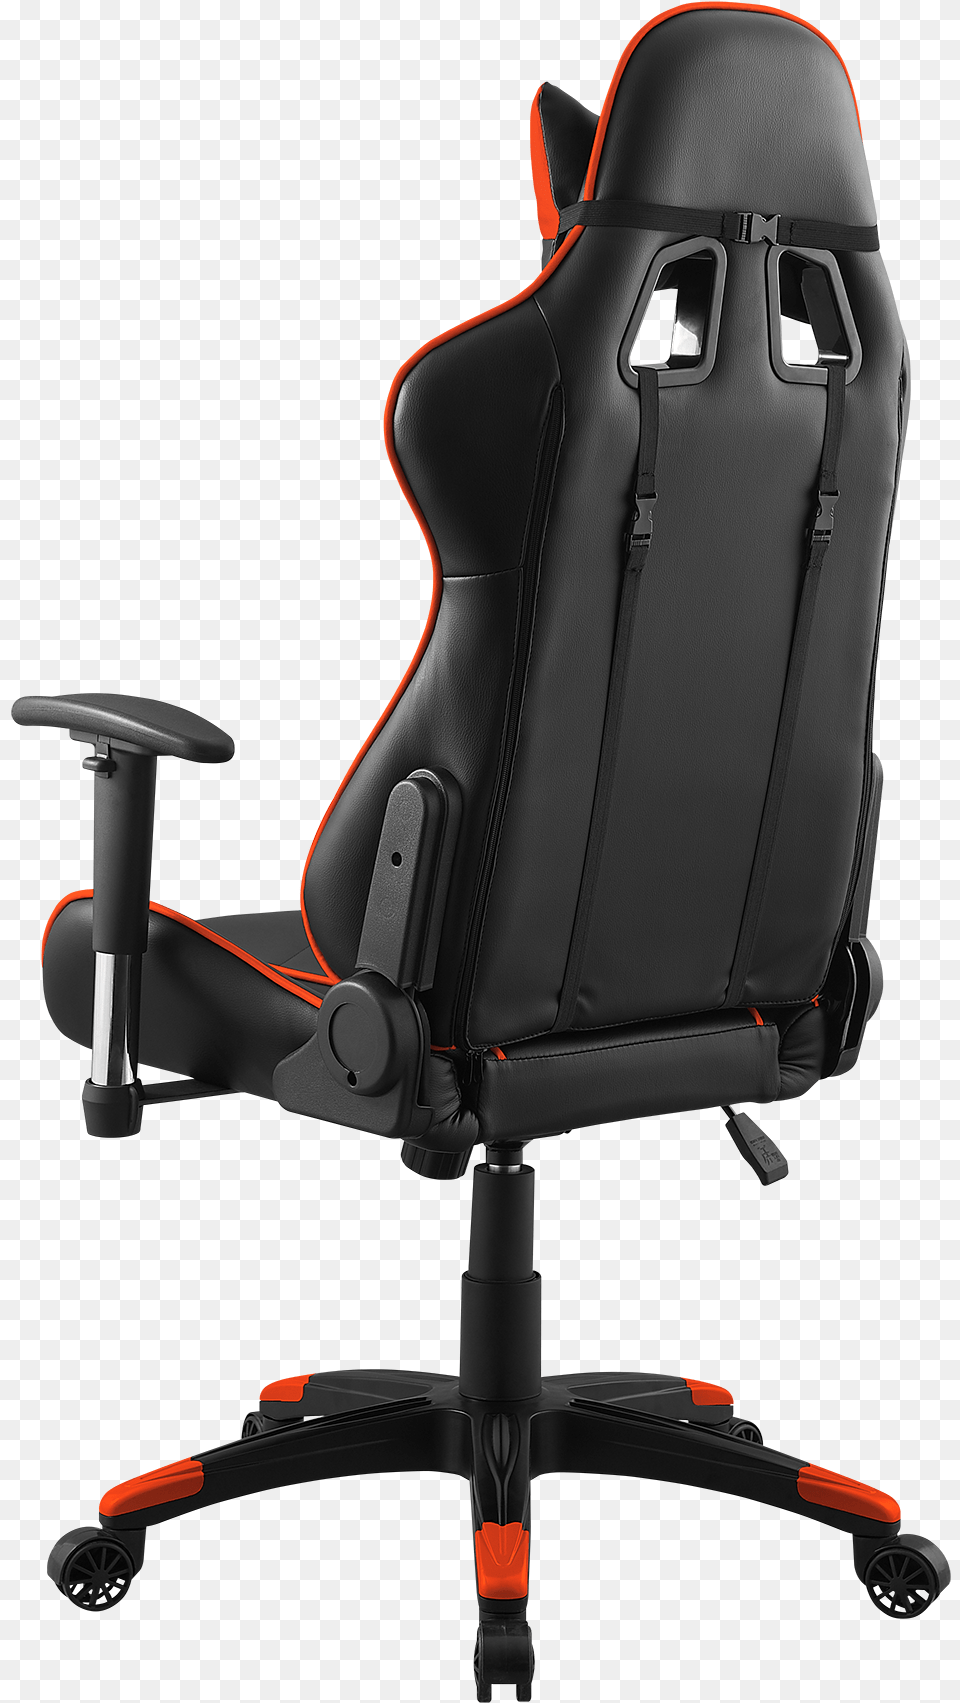 Alpha Gamer Hydra Gaming Chair Alpha Gamer Chair Red, Cushion, Home Decor, Furniture, Headrest Png Image